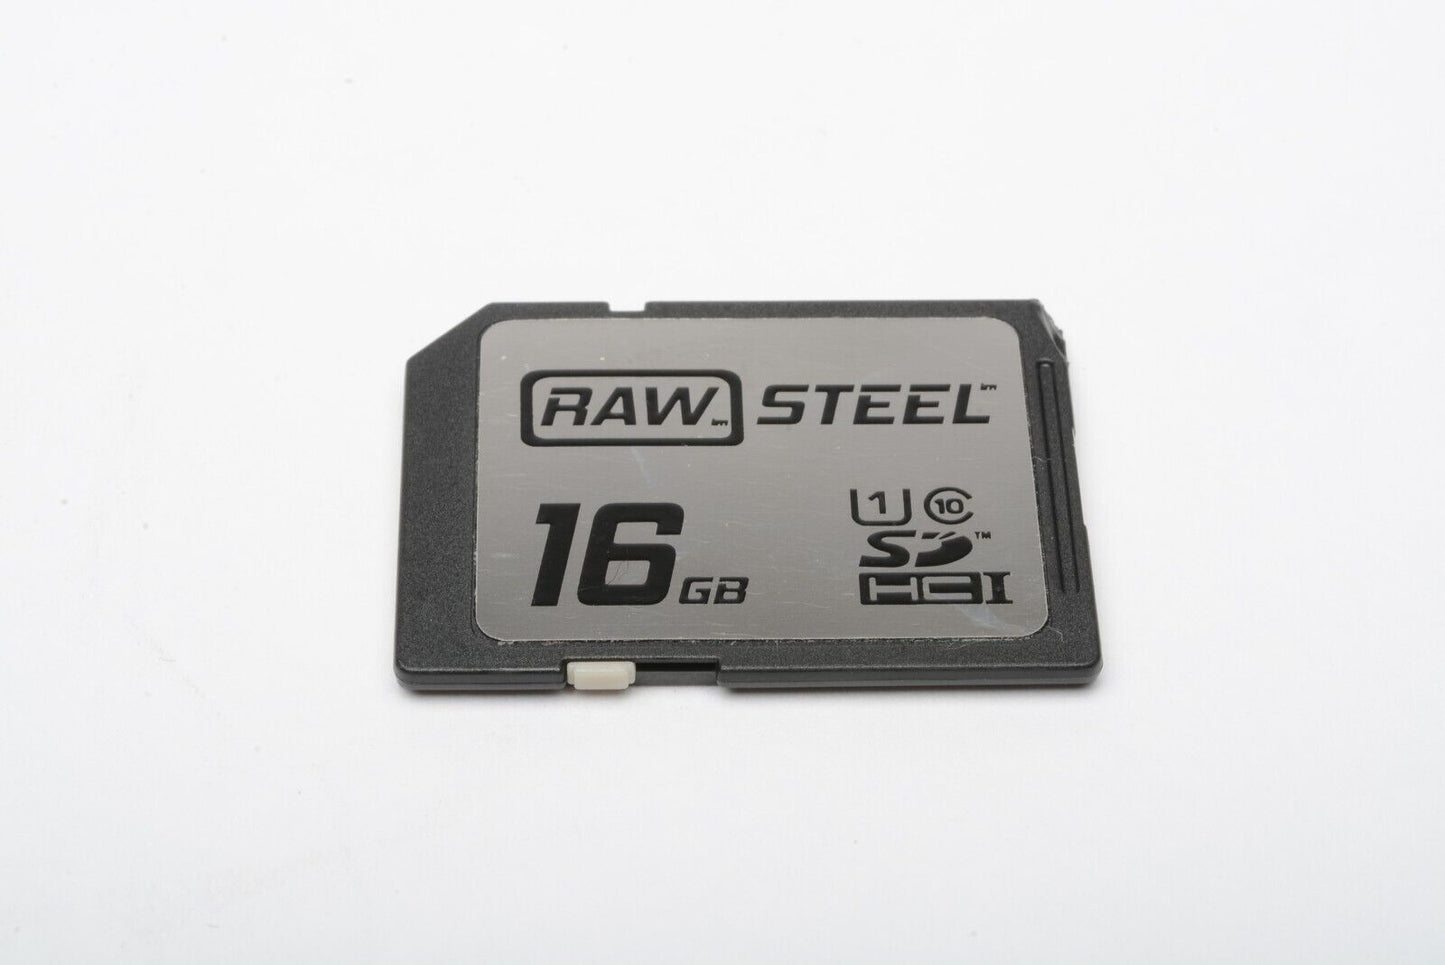 EXC++ RAW STEEL 16GB SD HC I SD CARD IN JEWEL CASE, FORMATTED